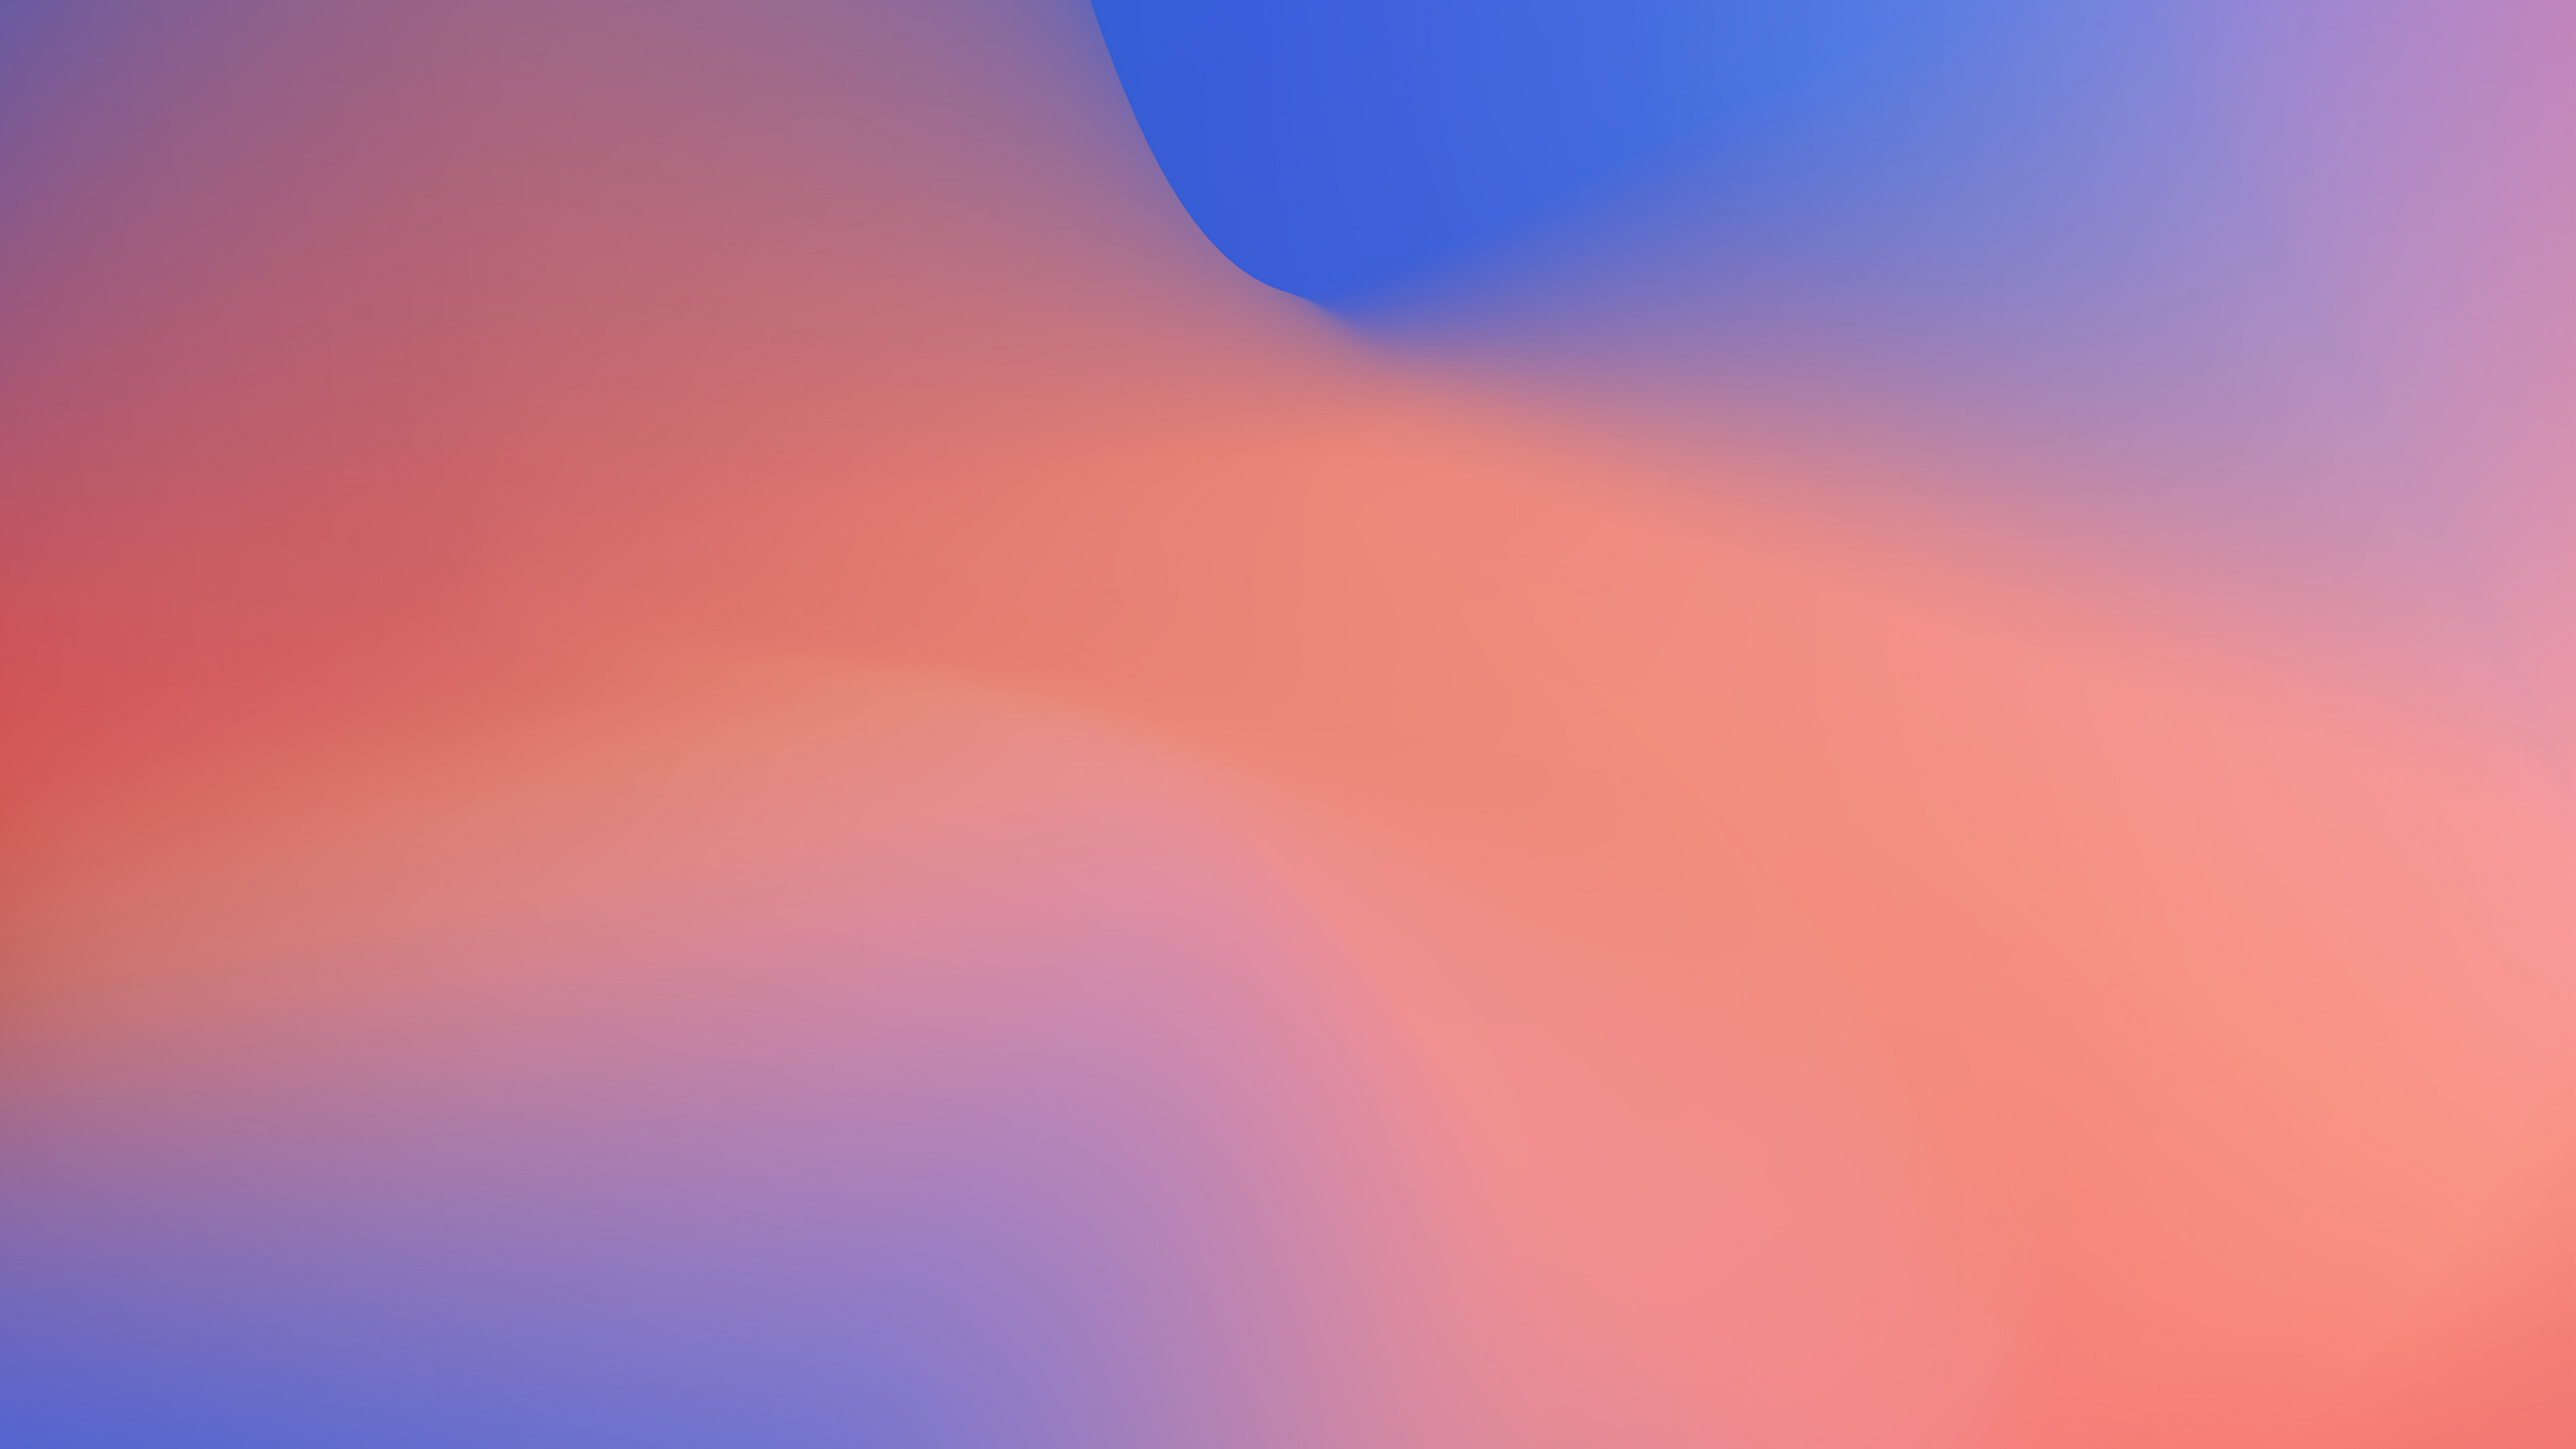 Wallpaper Google Pixel 3 Android 9 Pie Abstract 4k Os 20688